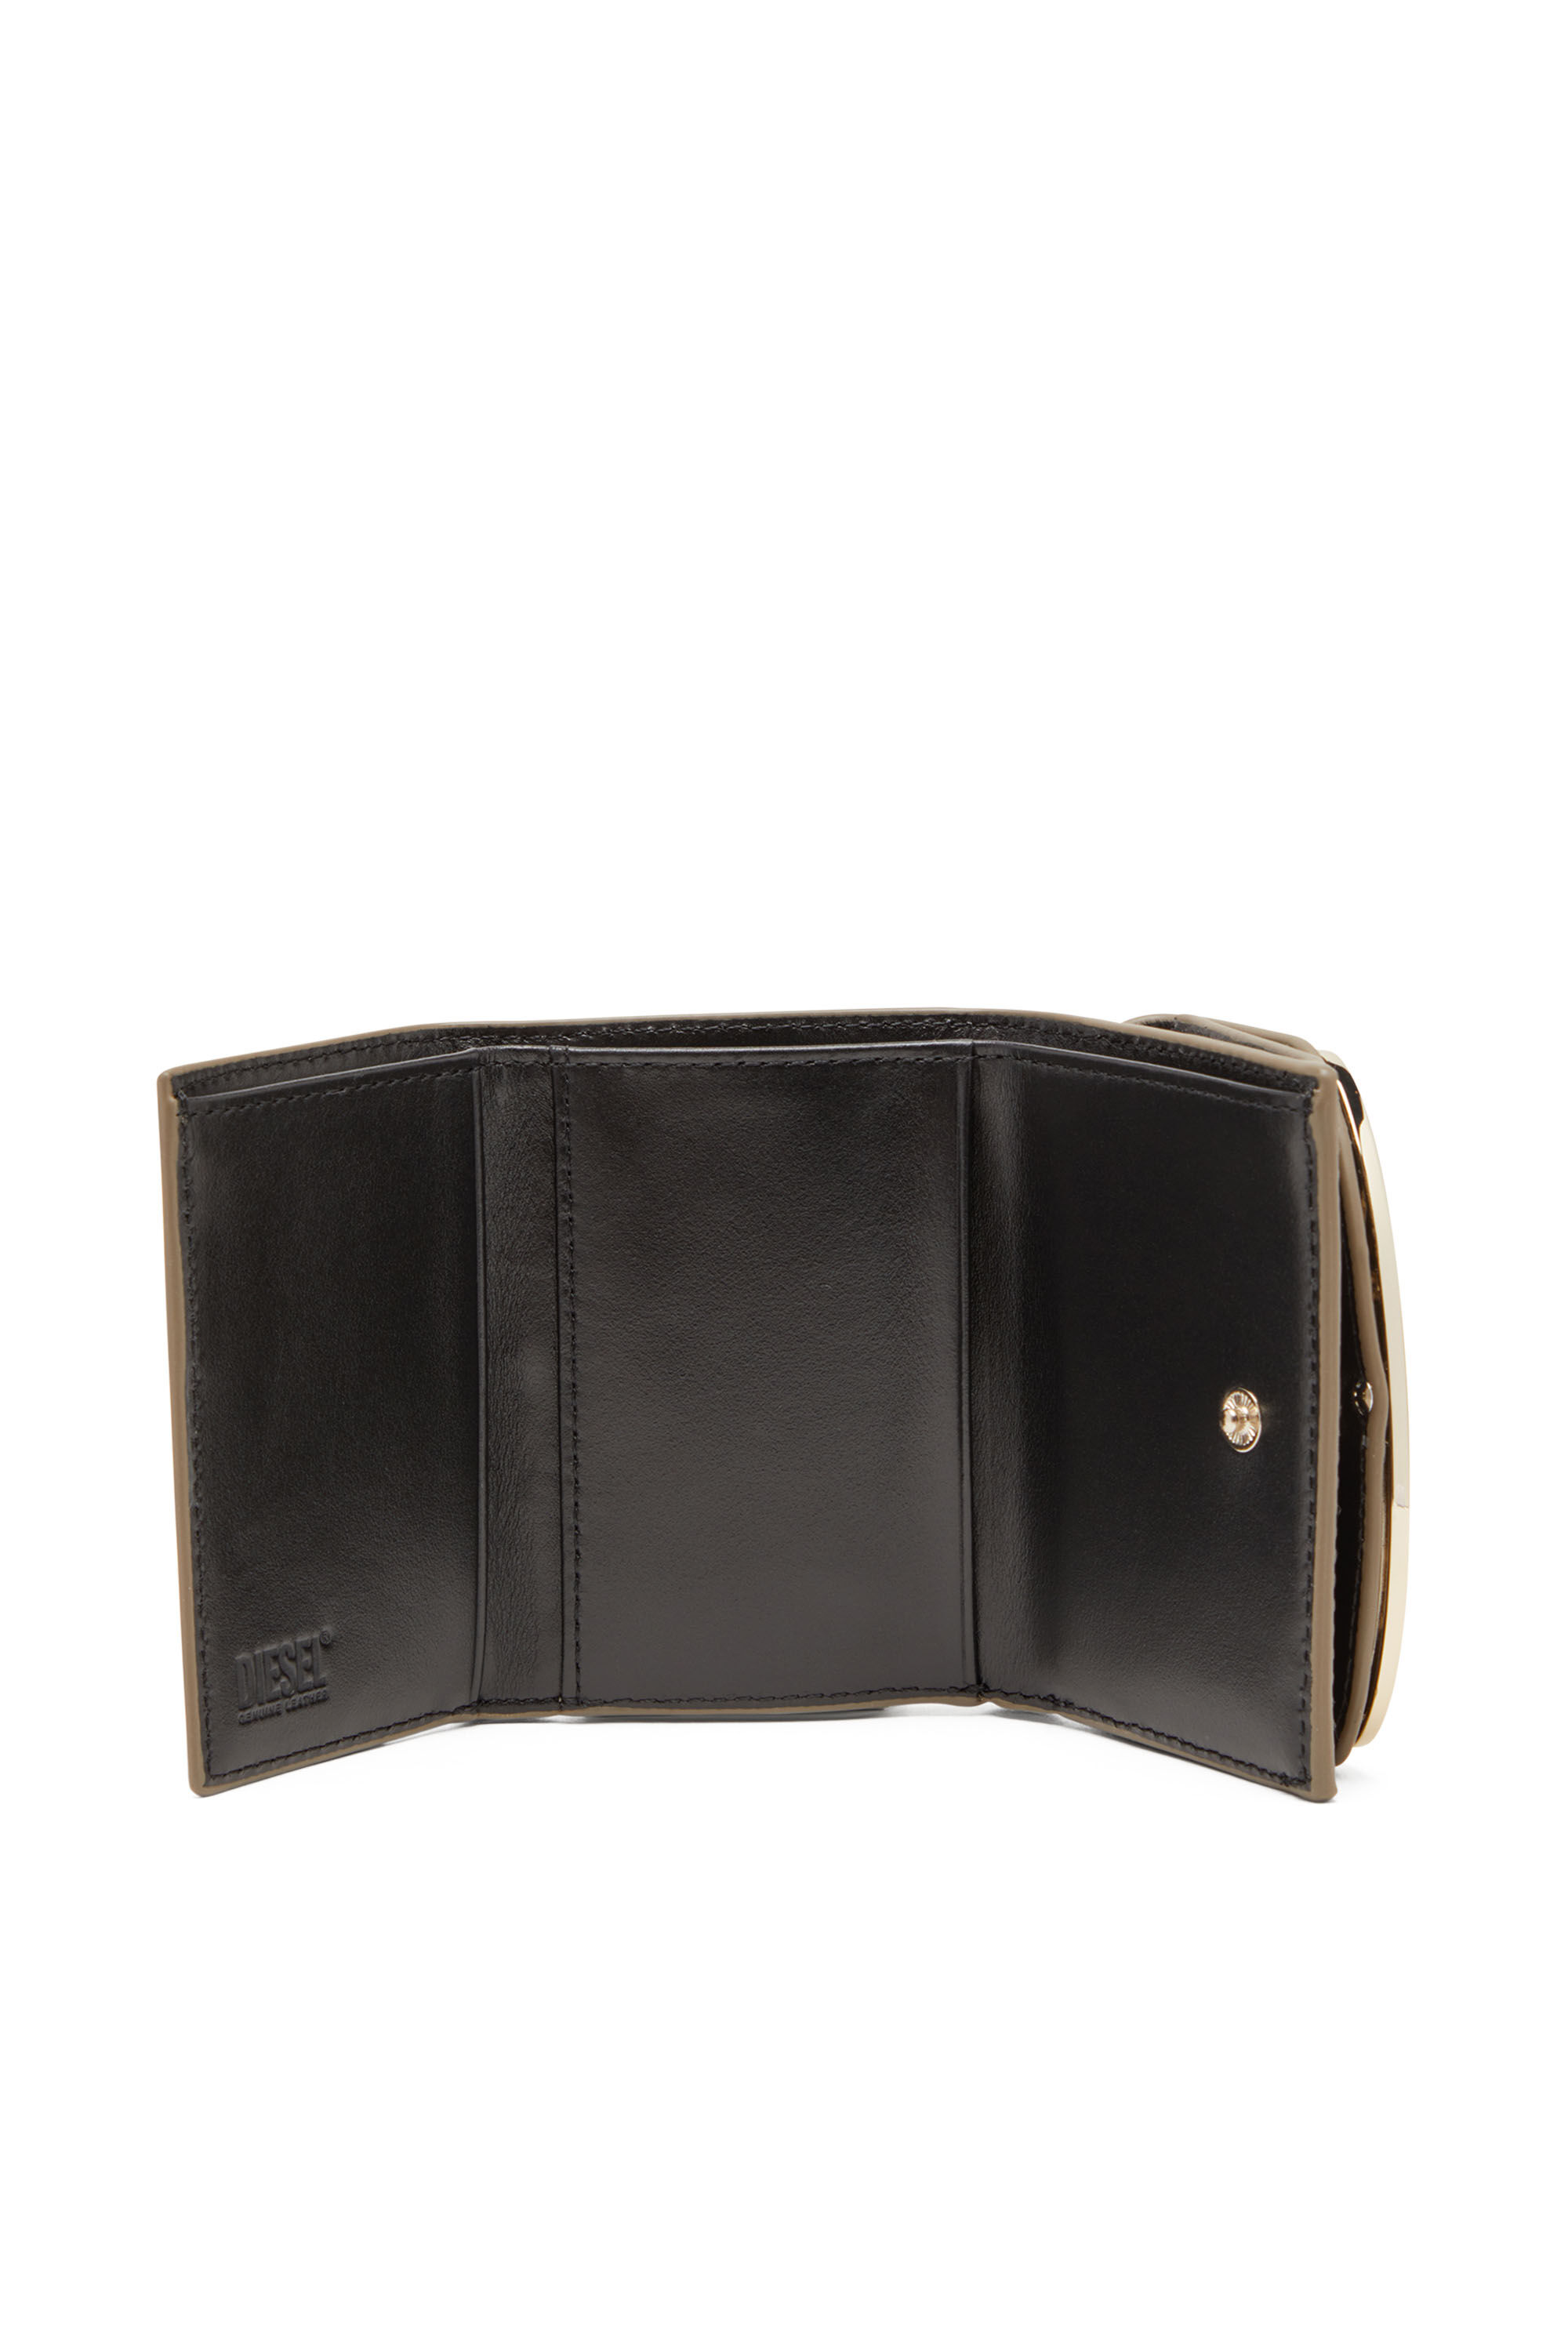 Diesel - 1DR TRI FOLD COIN XS II, Female Tri-fold wallet in mirrored leather in ブラウン - Image 3